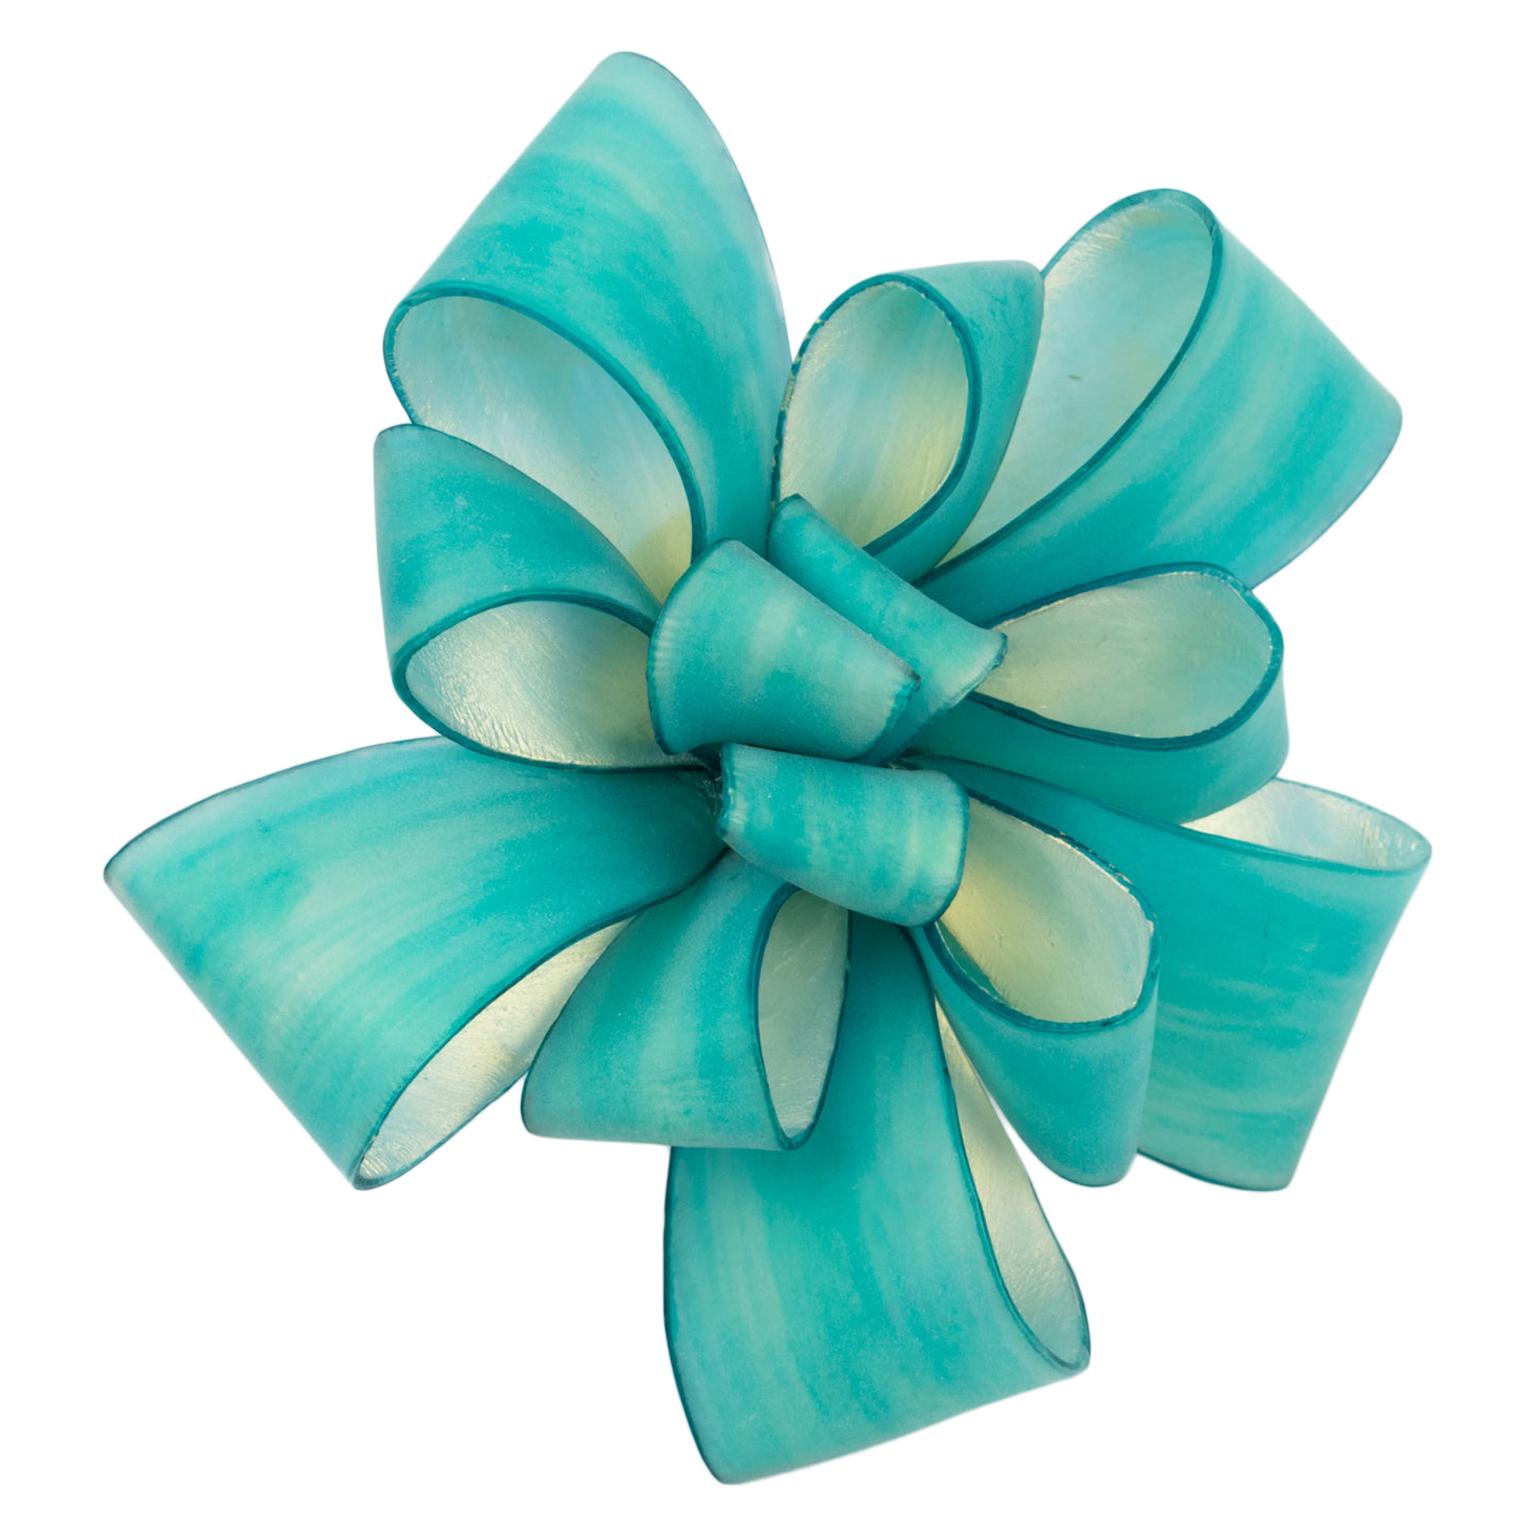 Cilea Paris Oversized Turquoise Resin Ribbon Pin Brooch For Sale